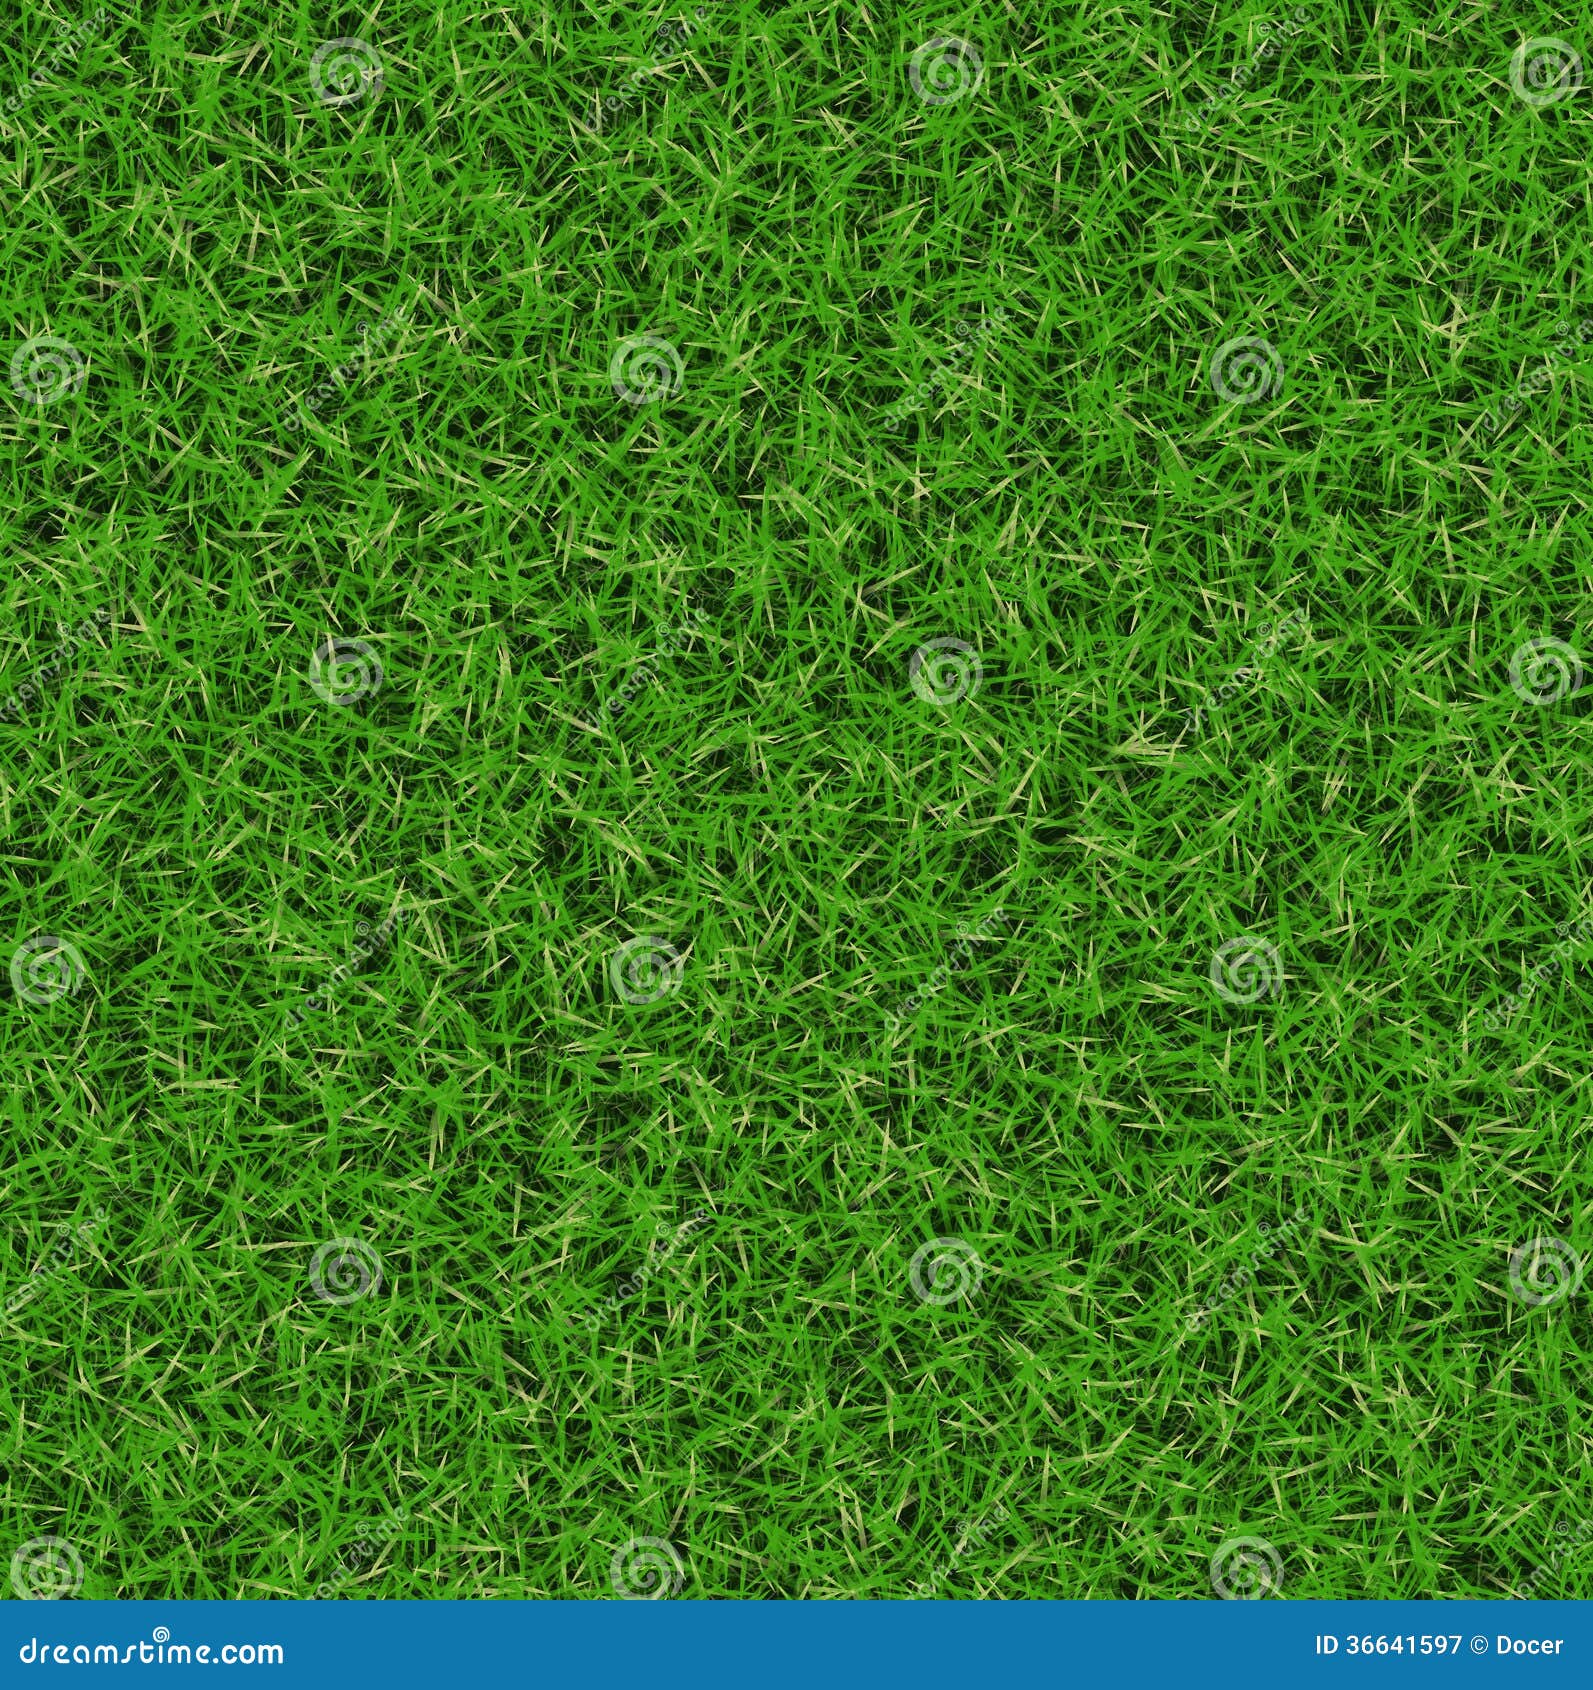 Lush Green Grass Texture. Wallpapers Pattern Stock Image - Image of